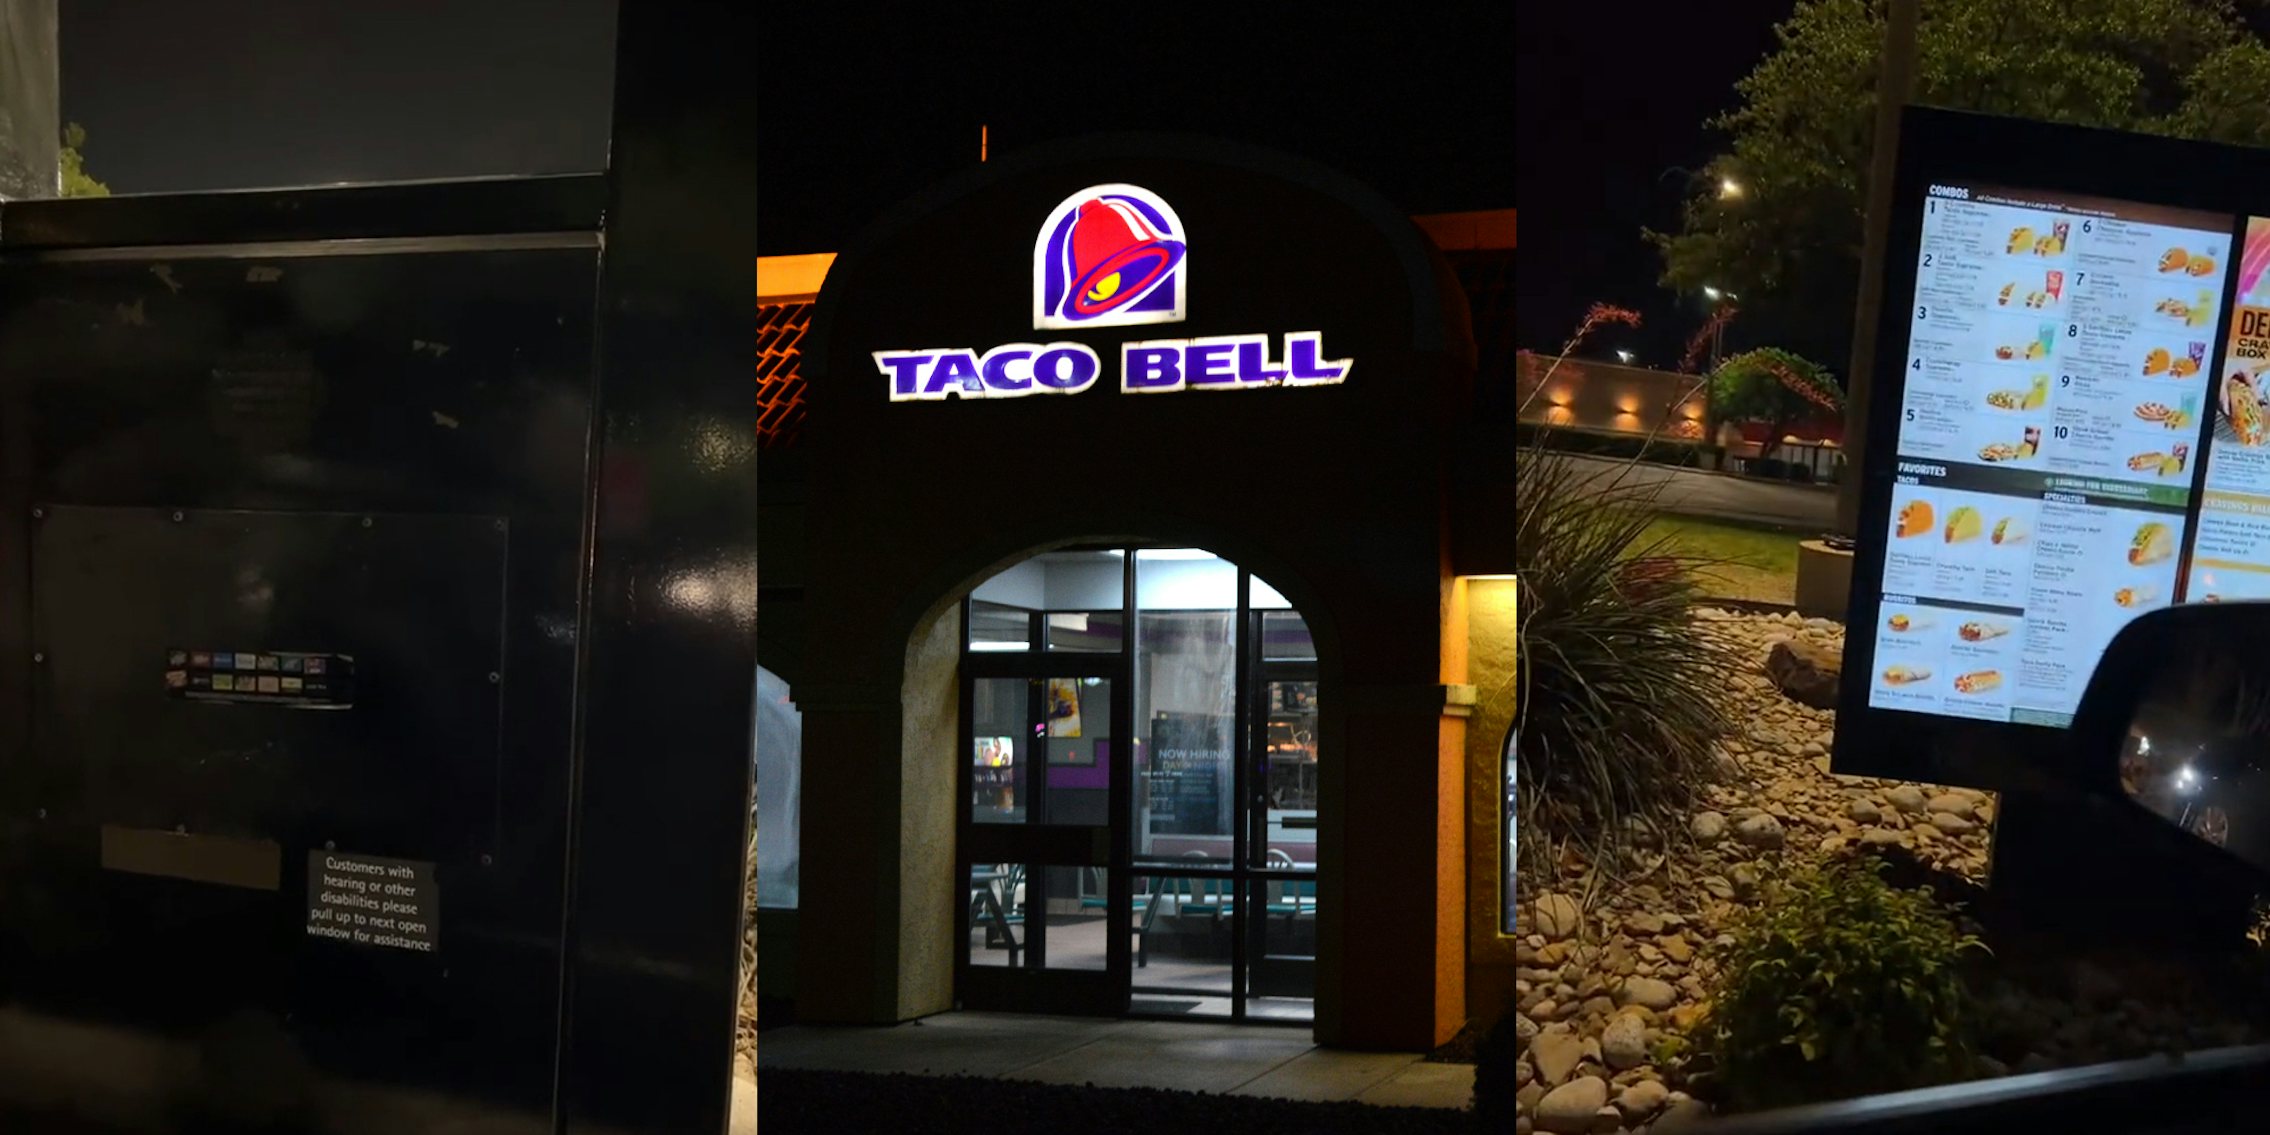 Taco Bell drive thru speaker (l) Taco Bell building with sign at night (c) Taco Bell outdoor menu at drive thru at night (r)